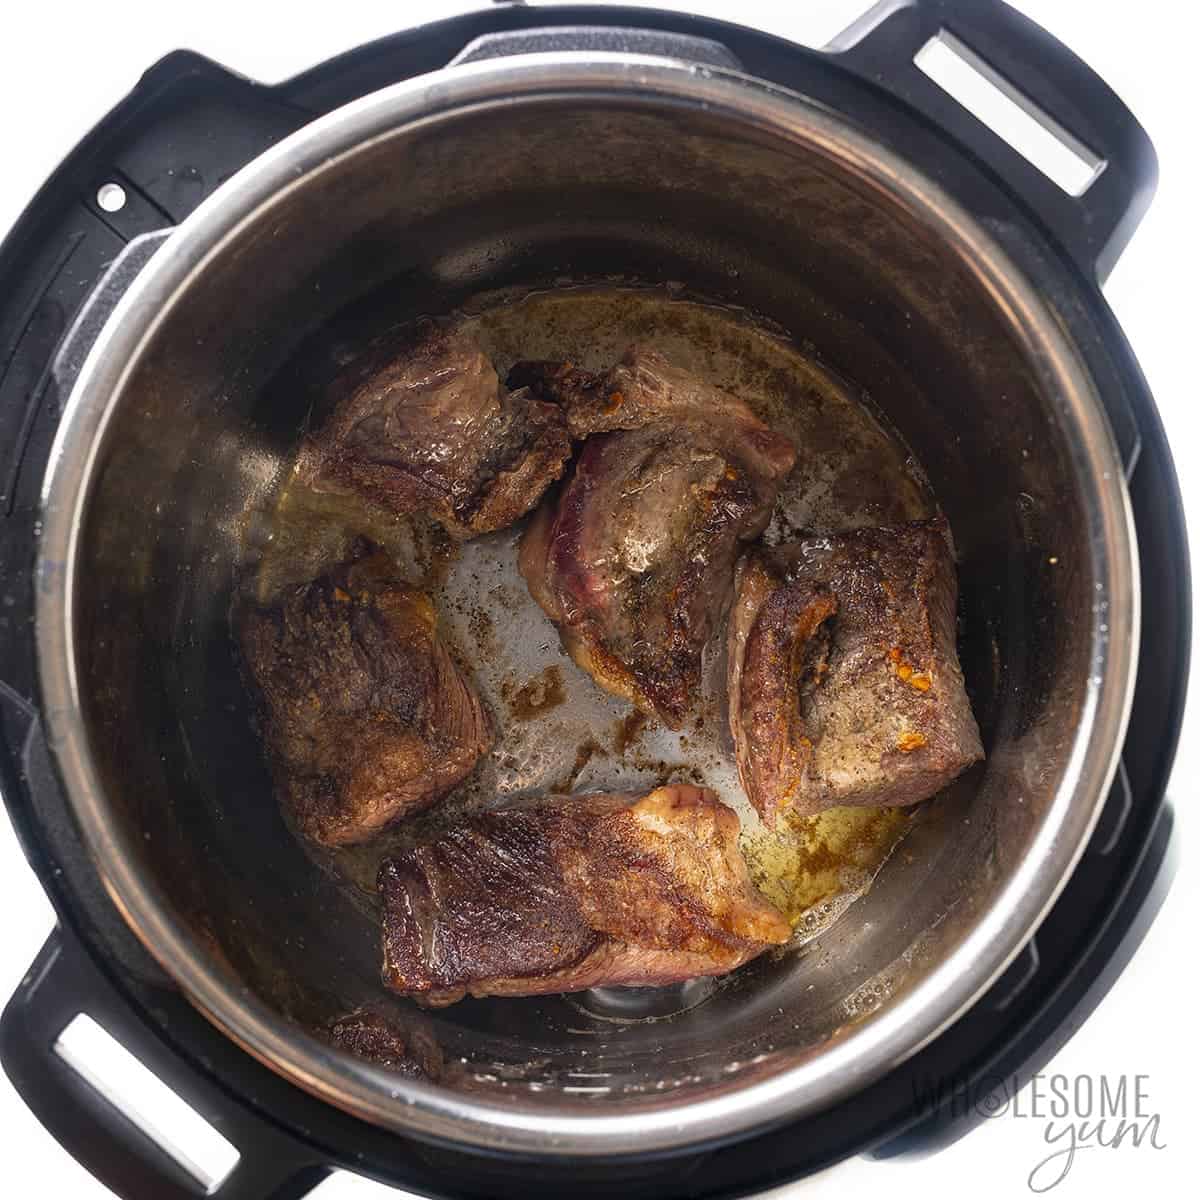 Beef short ribs searing in Instant Pot.